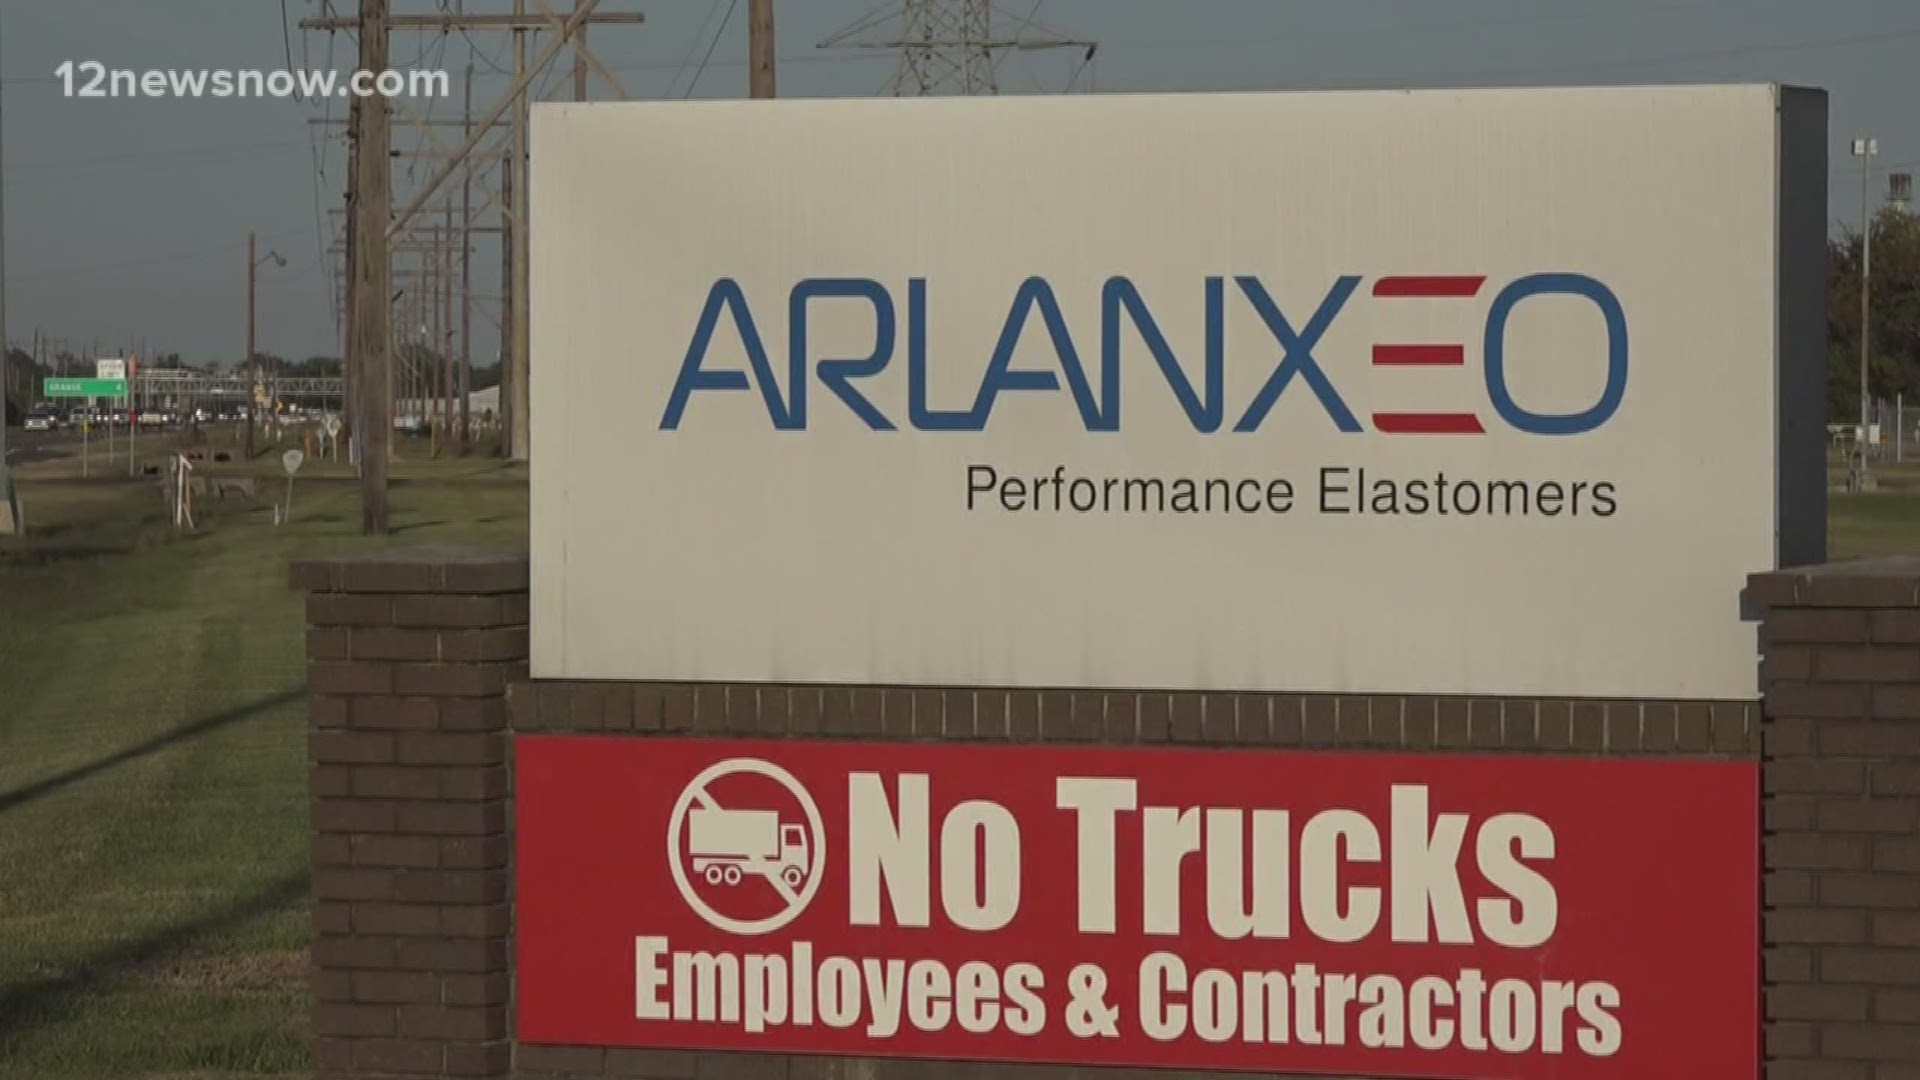 Arlanxeo Performance Elastomers will be closing a unit within its facility in 2020.